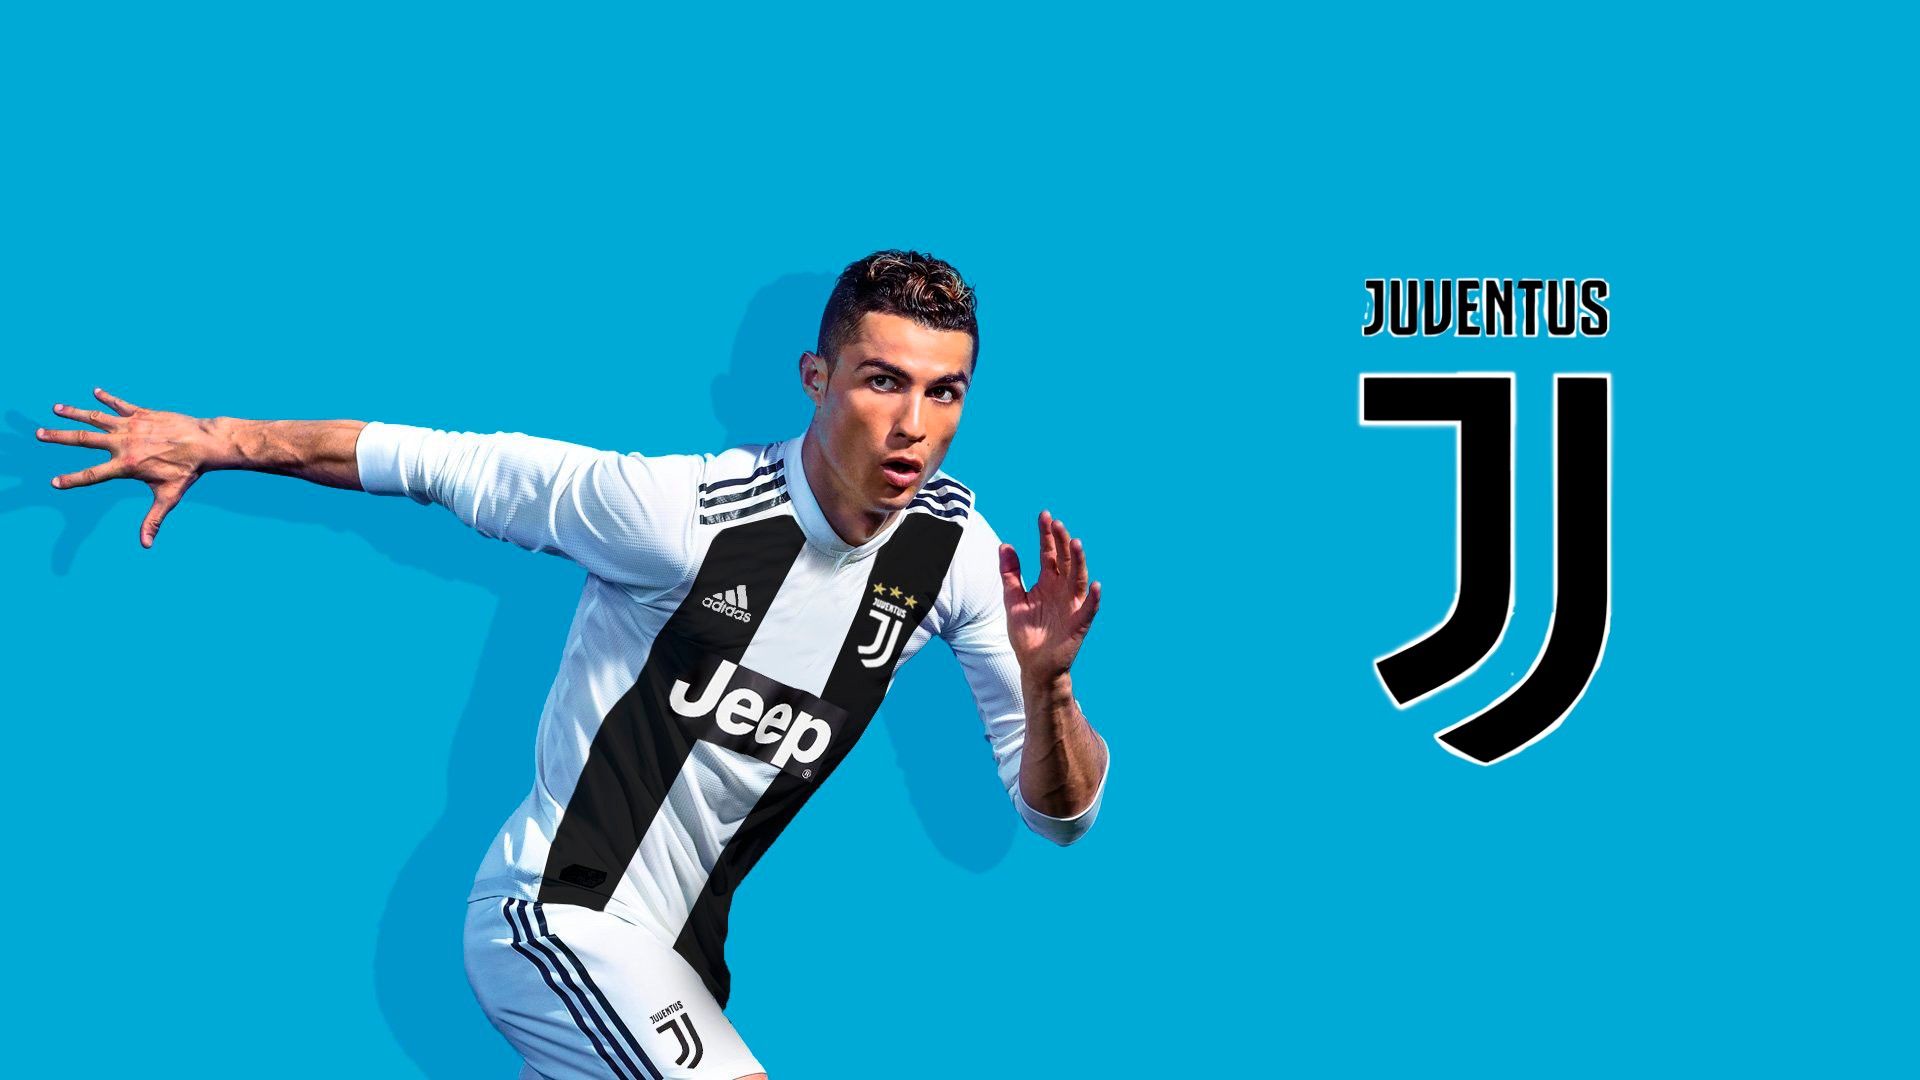 HD Cristiano Ronaldo Juventus Wallpapers with resolution 1920x1080 pixel. You can make this wallpaper for your Mac or Windows Desktop Background, iPhone, Android or Tablet and another Smartphone device